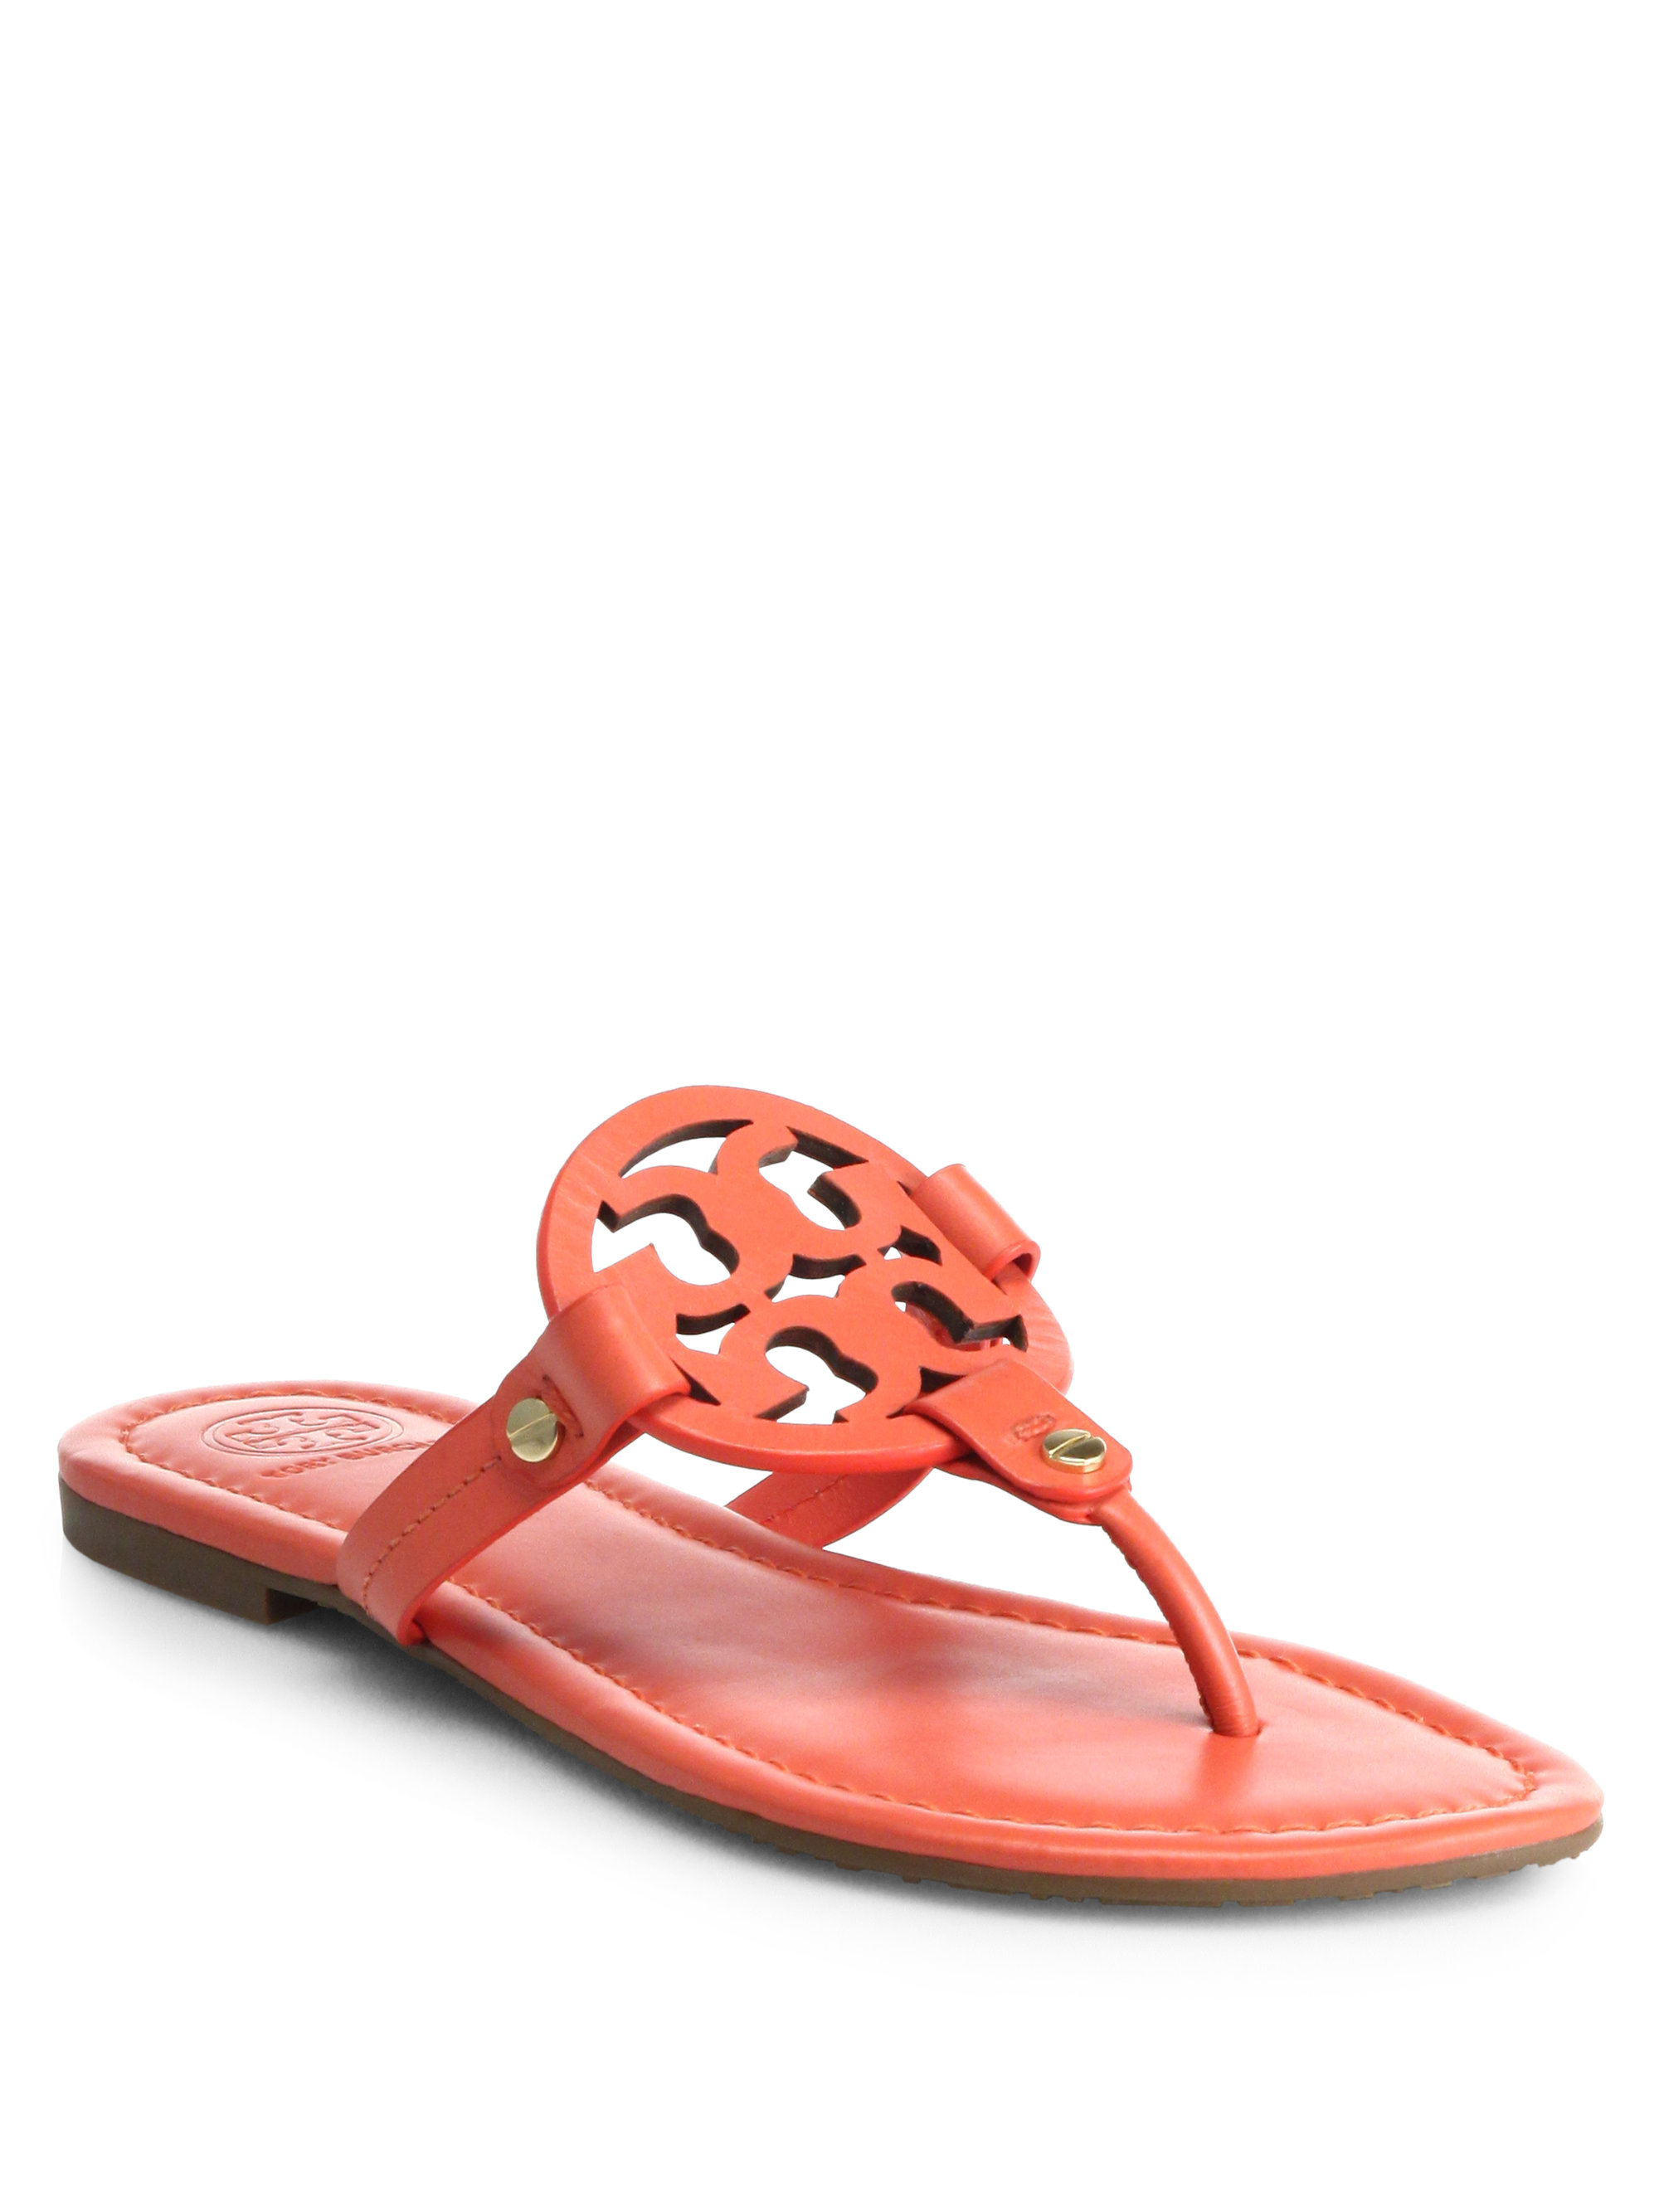 Lyst - Tory Burch Miller Leather Logo Thong Sandals in Orange